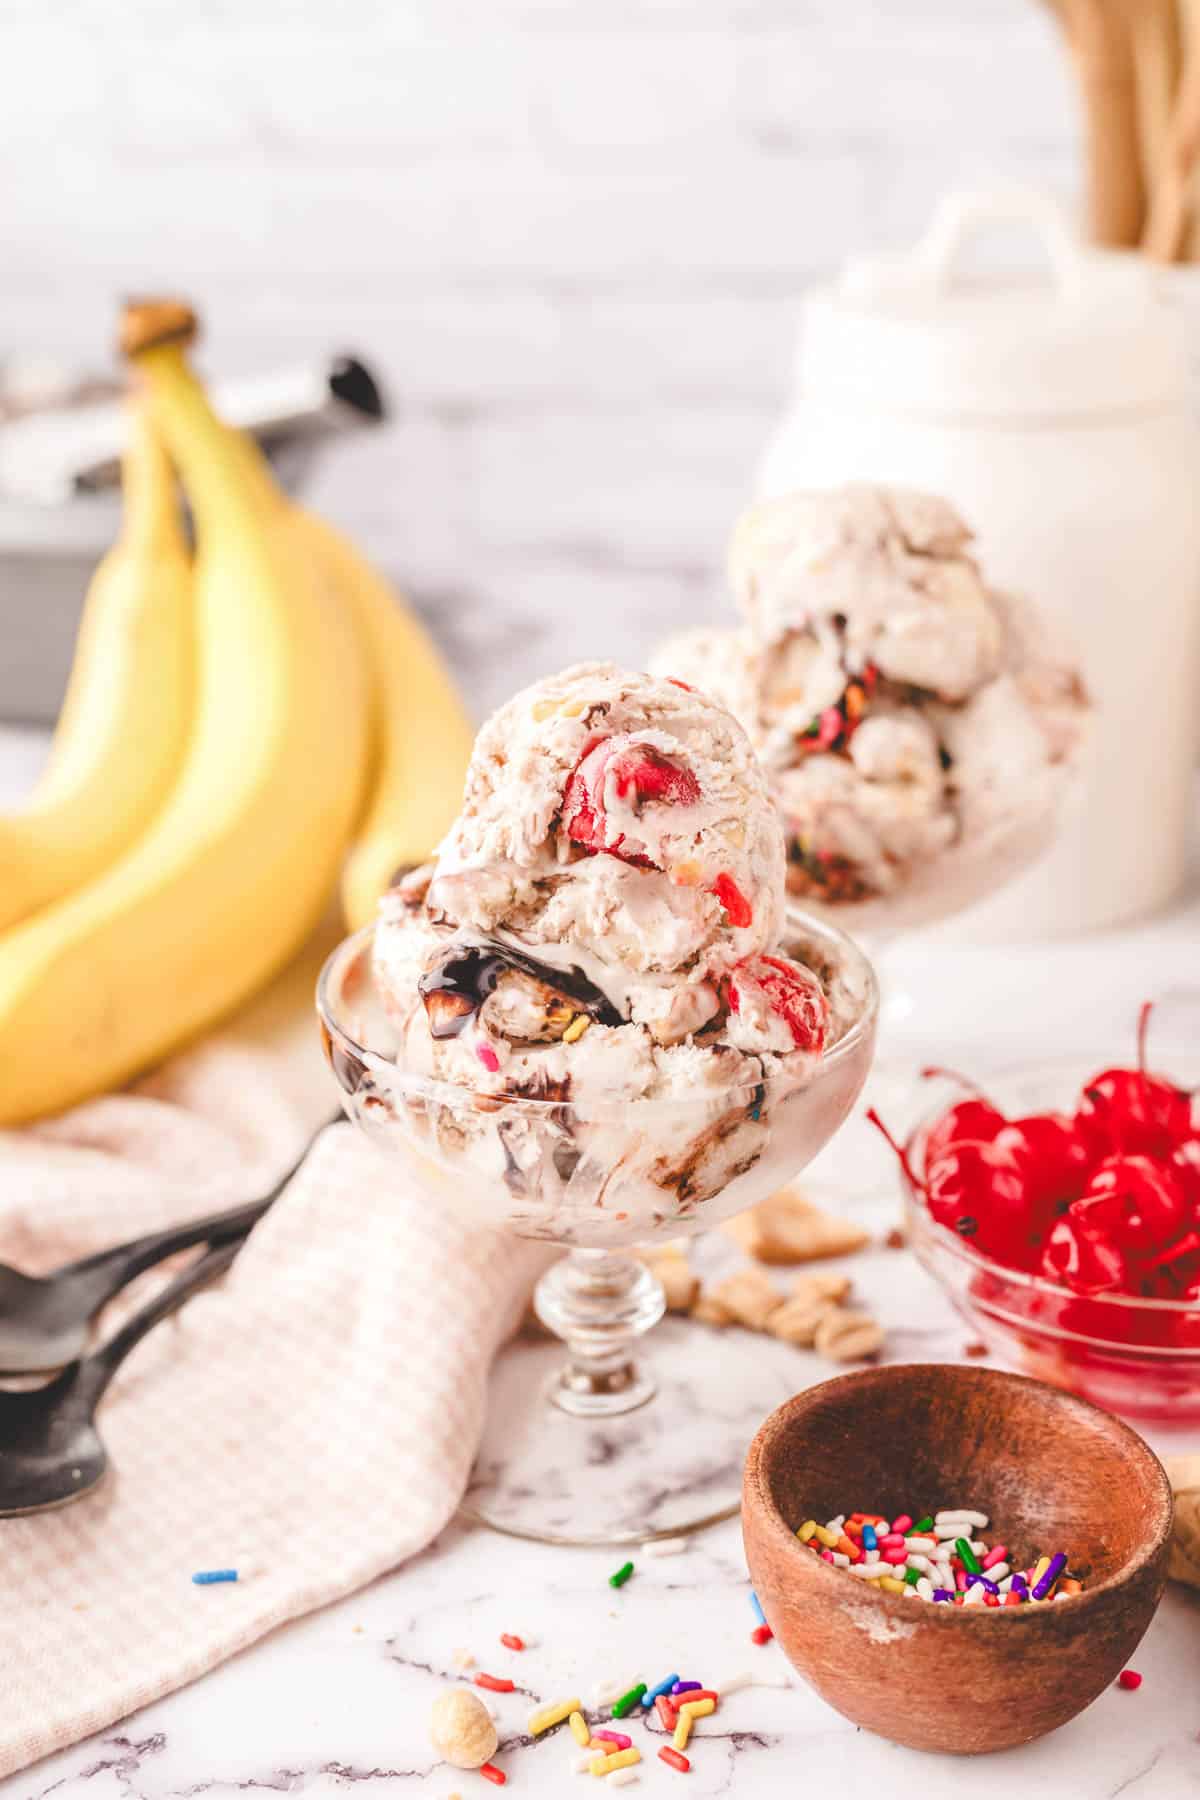 A glass dessert bowl with scoops of banana slip ice cream with sprinkles, cherries, and banana condiments.